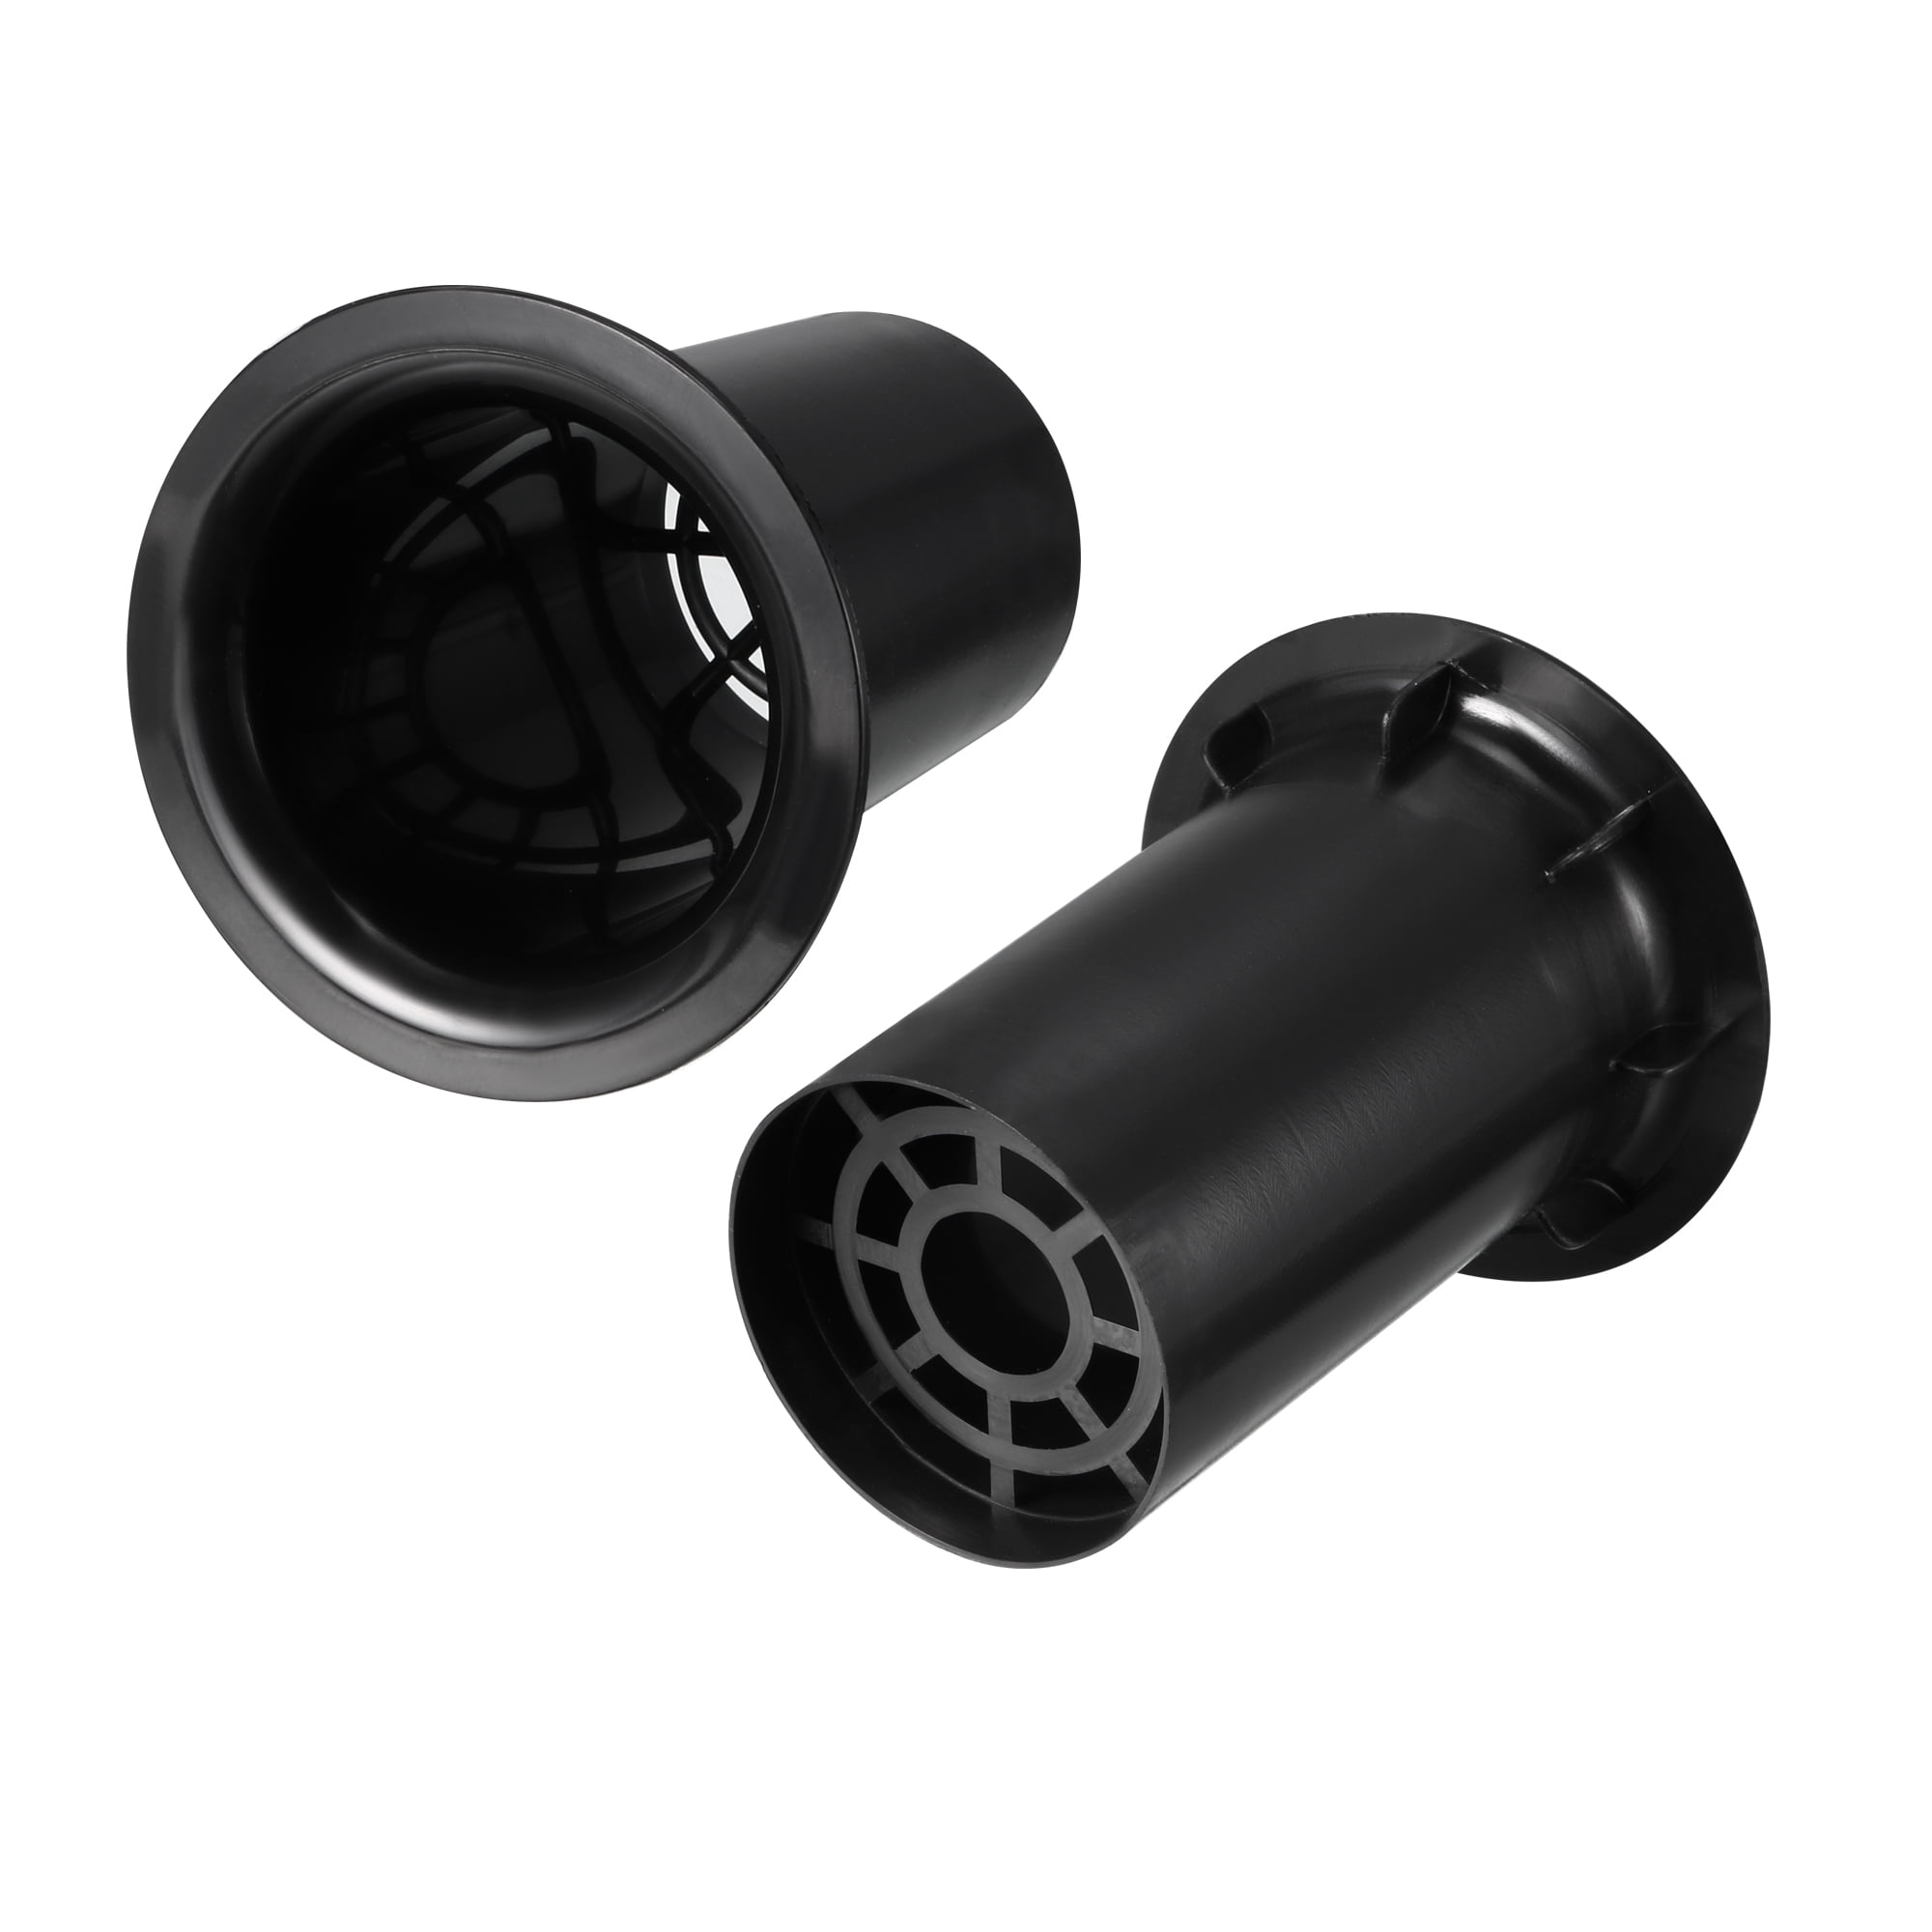 2" Subwoofer Port Tube Increase your Sub Bass Response 